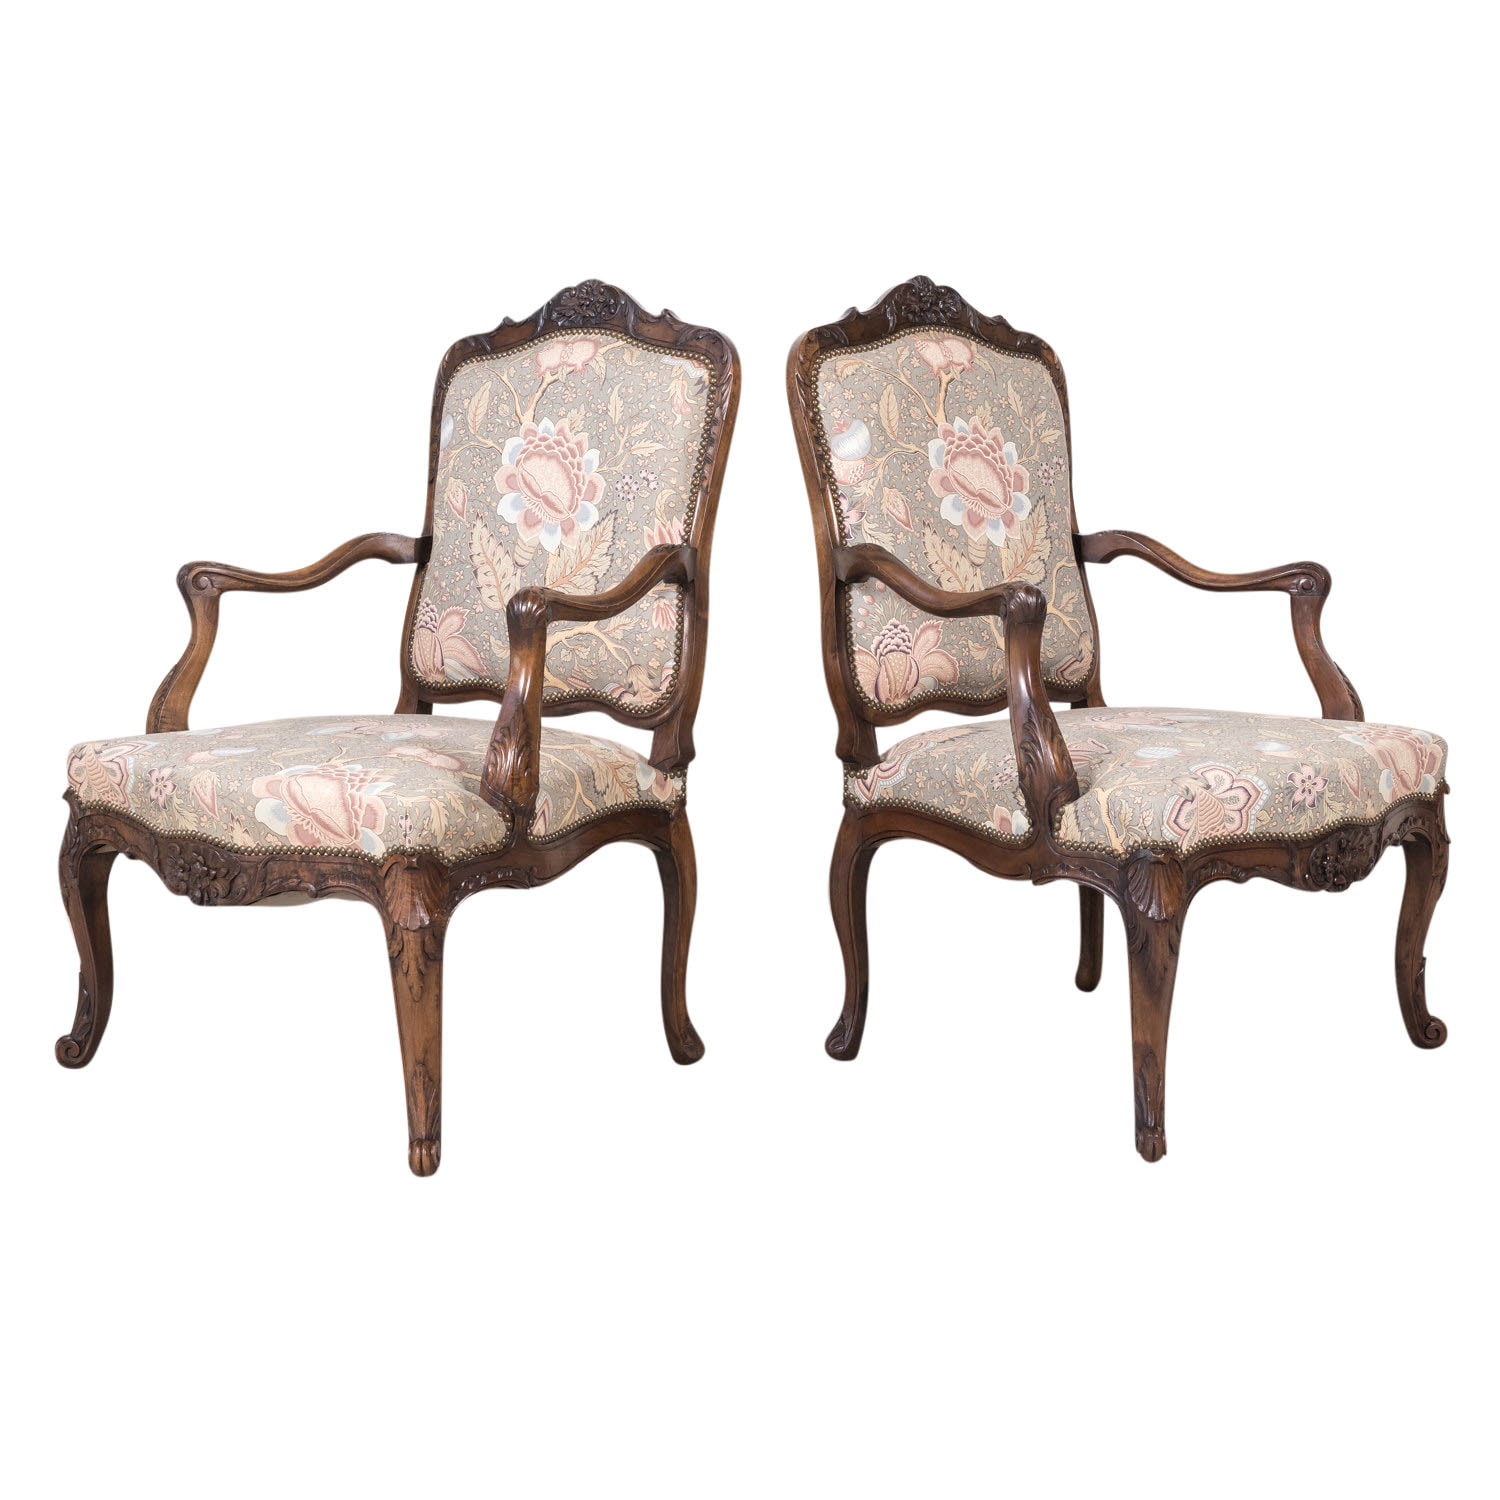 LOLO FRENCH ANTIQUES PAIR OF LOUIS XIII STYLE WALNUT FAUTEUILS WITH  ORIGINAL TAPESTRY UPHOLSTERY - Lolo French Antiques et More